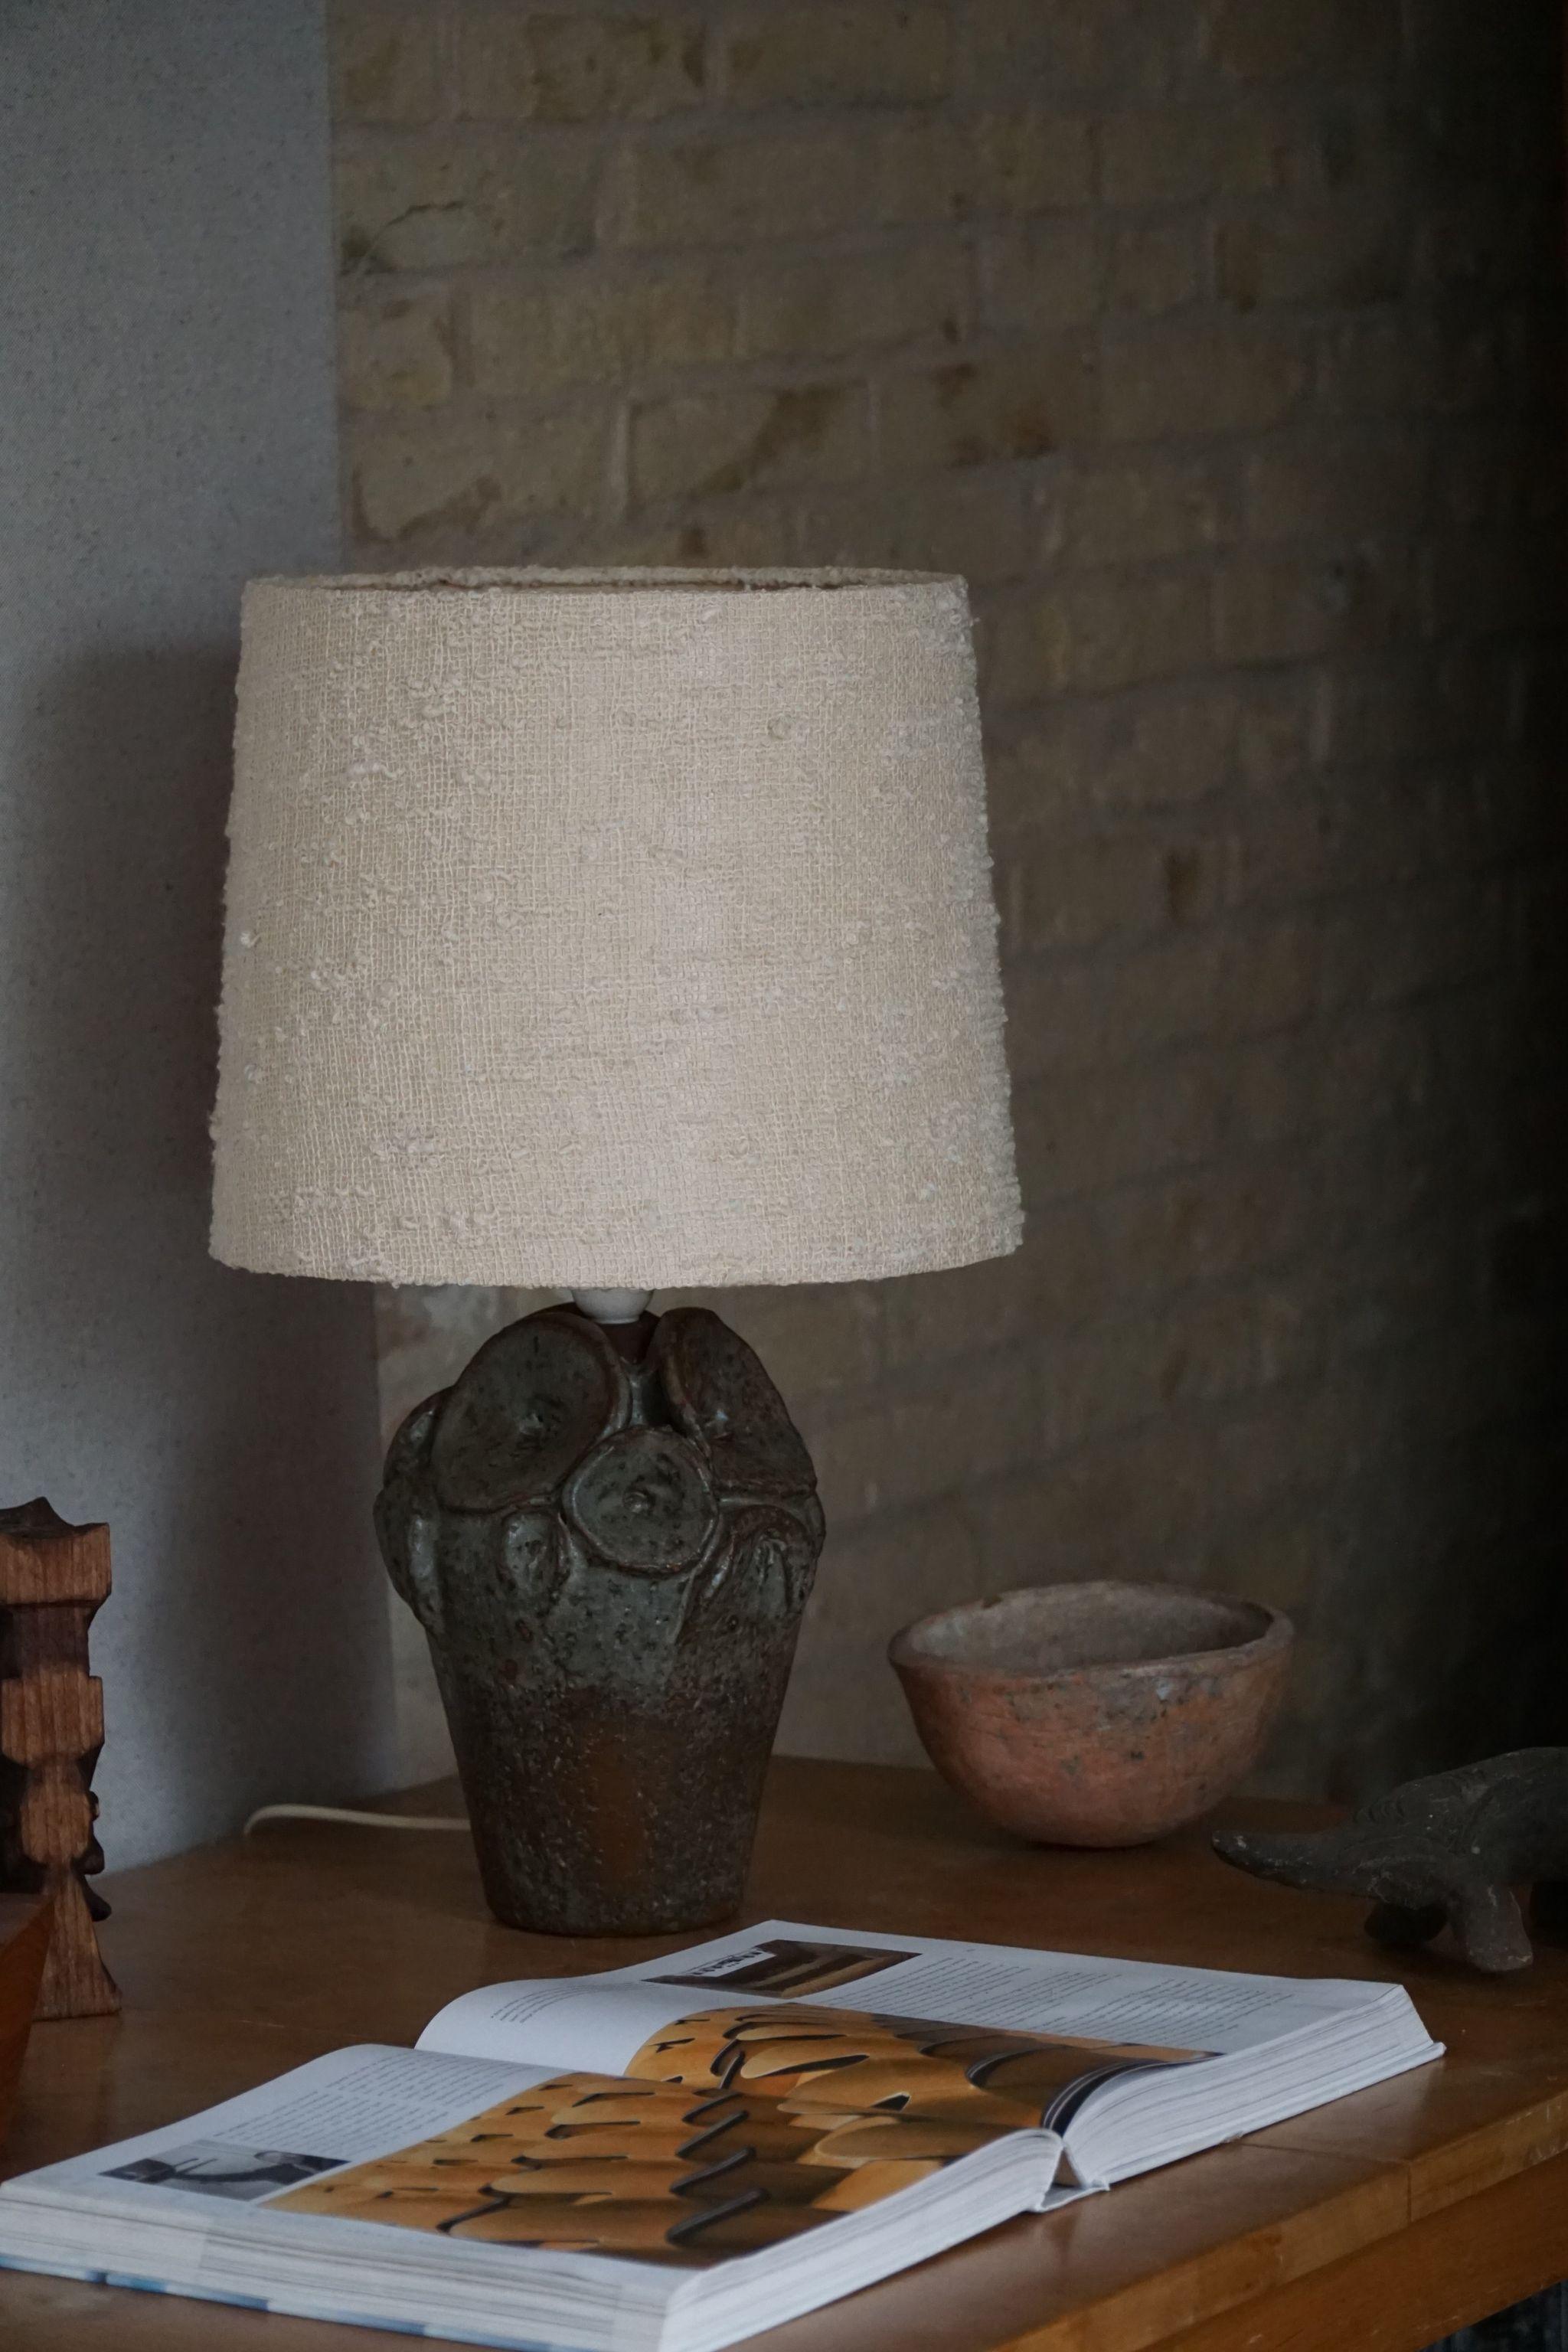 Danish Modern organic shaped stoneware table lamp with flower motifs. Made in various earthern / brown colors. Made in the 1970s by Helmich Keramik, signed underneath. 

This item is in a great vintage condition. This beautiful and calm lighting